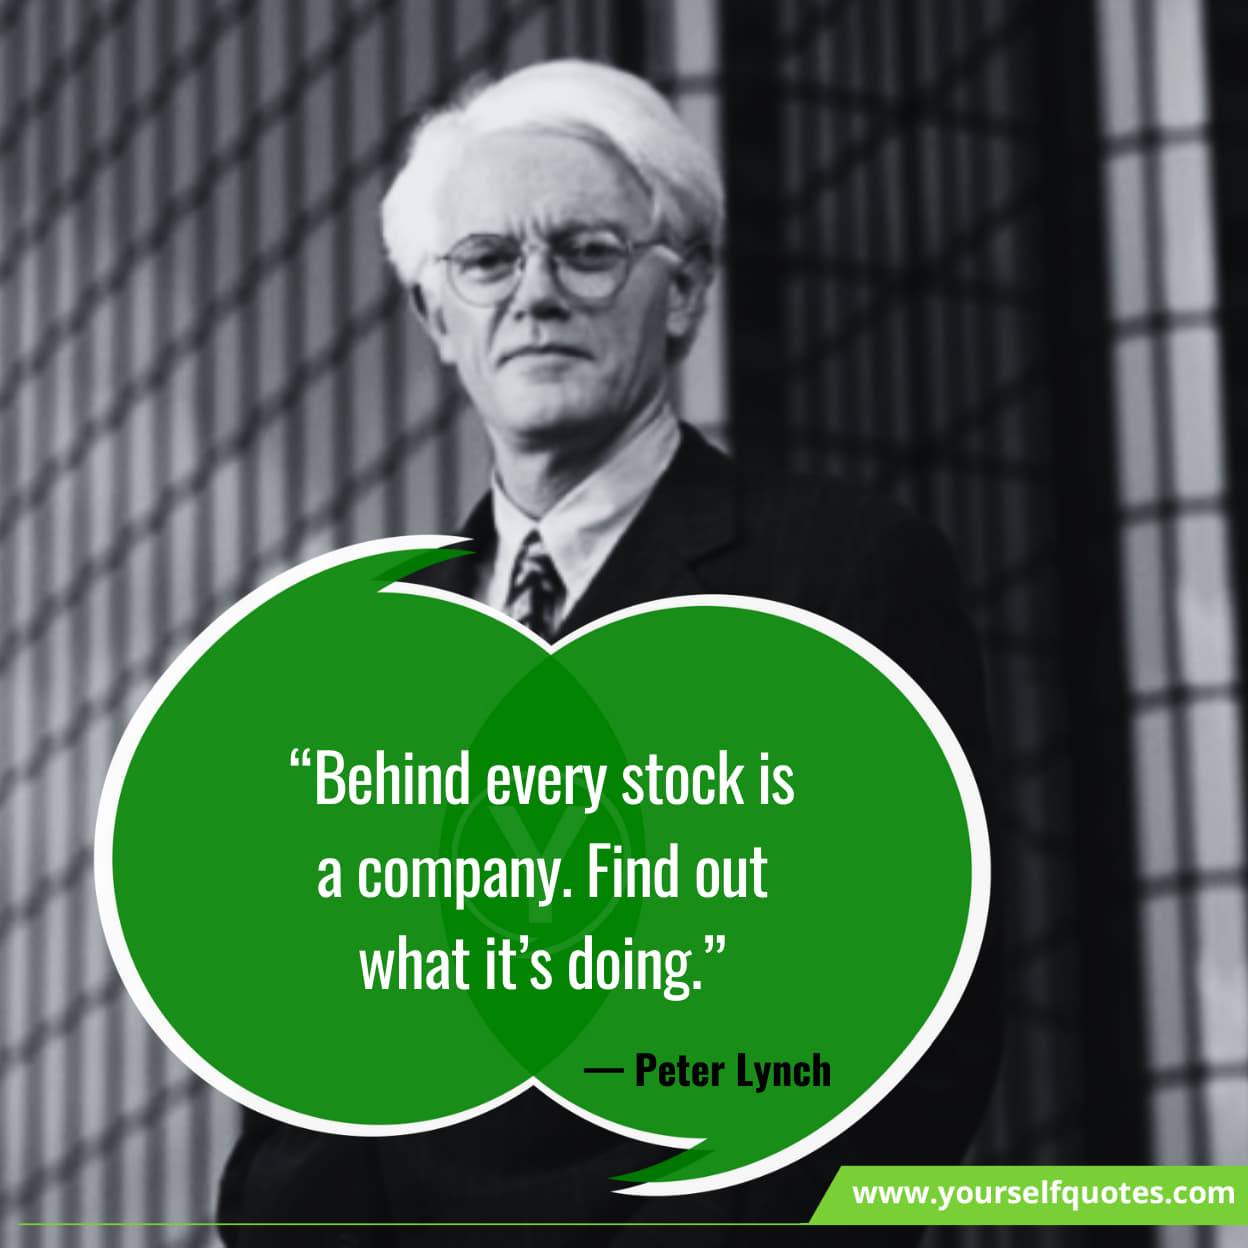 Stock Market Quotes On Value Investing